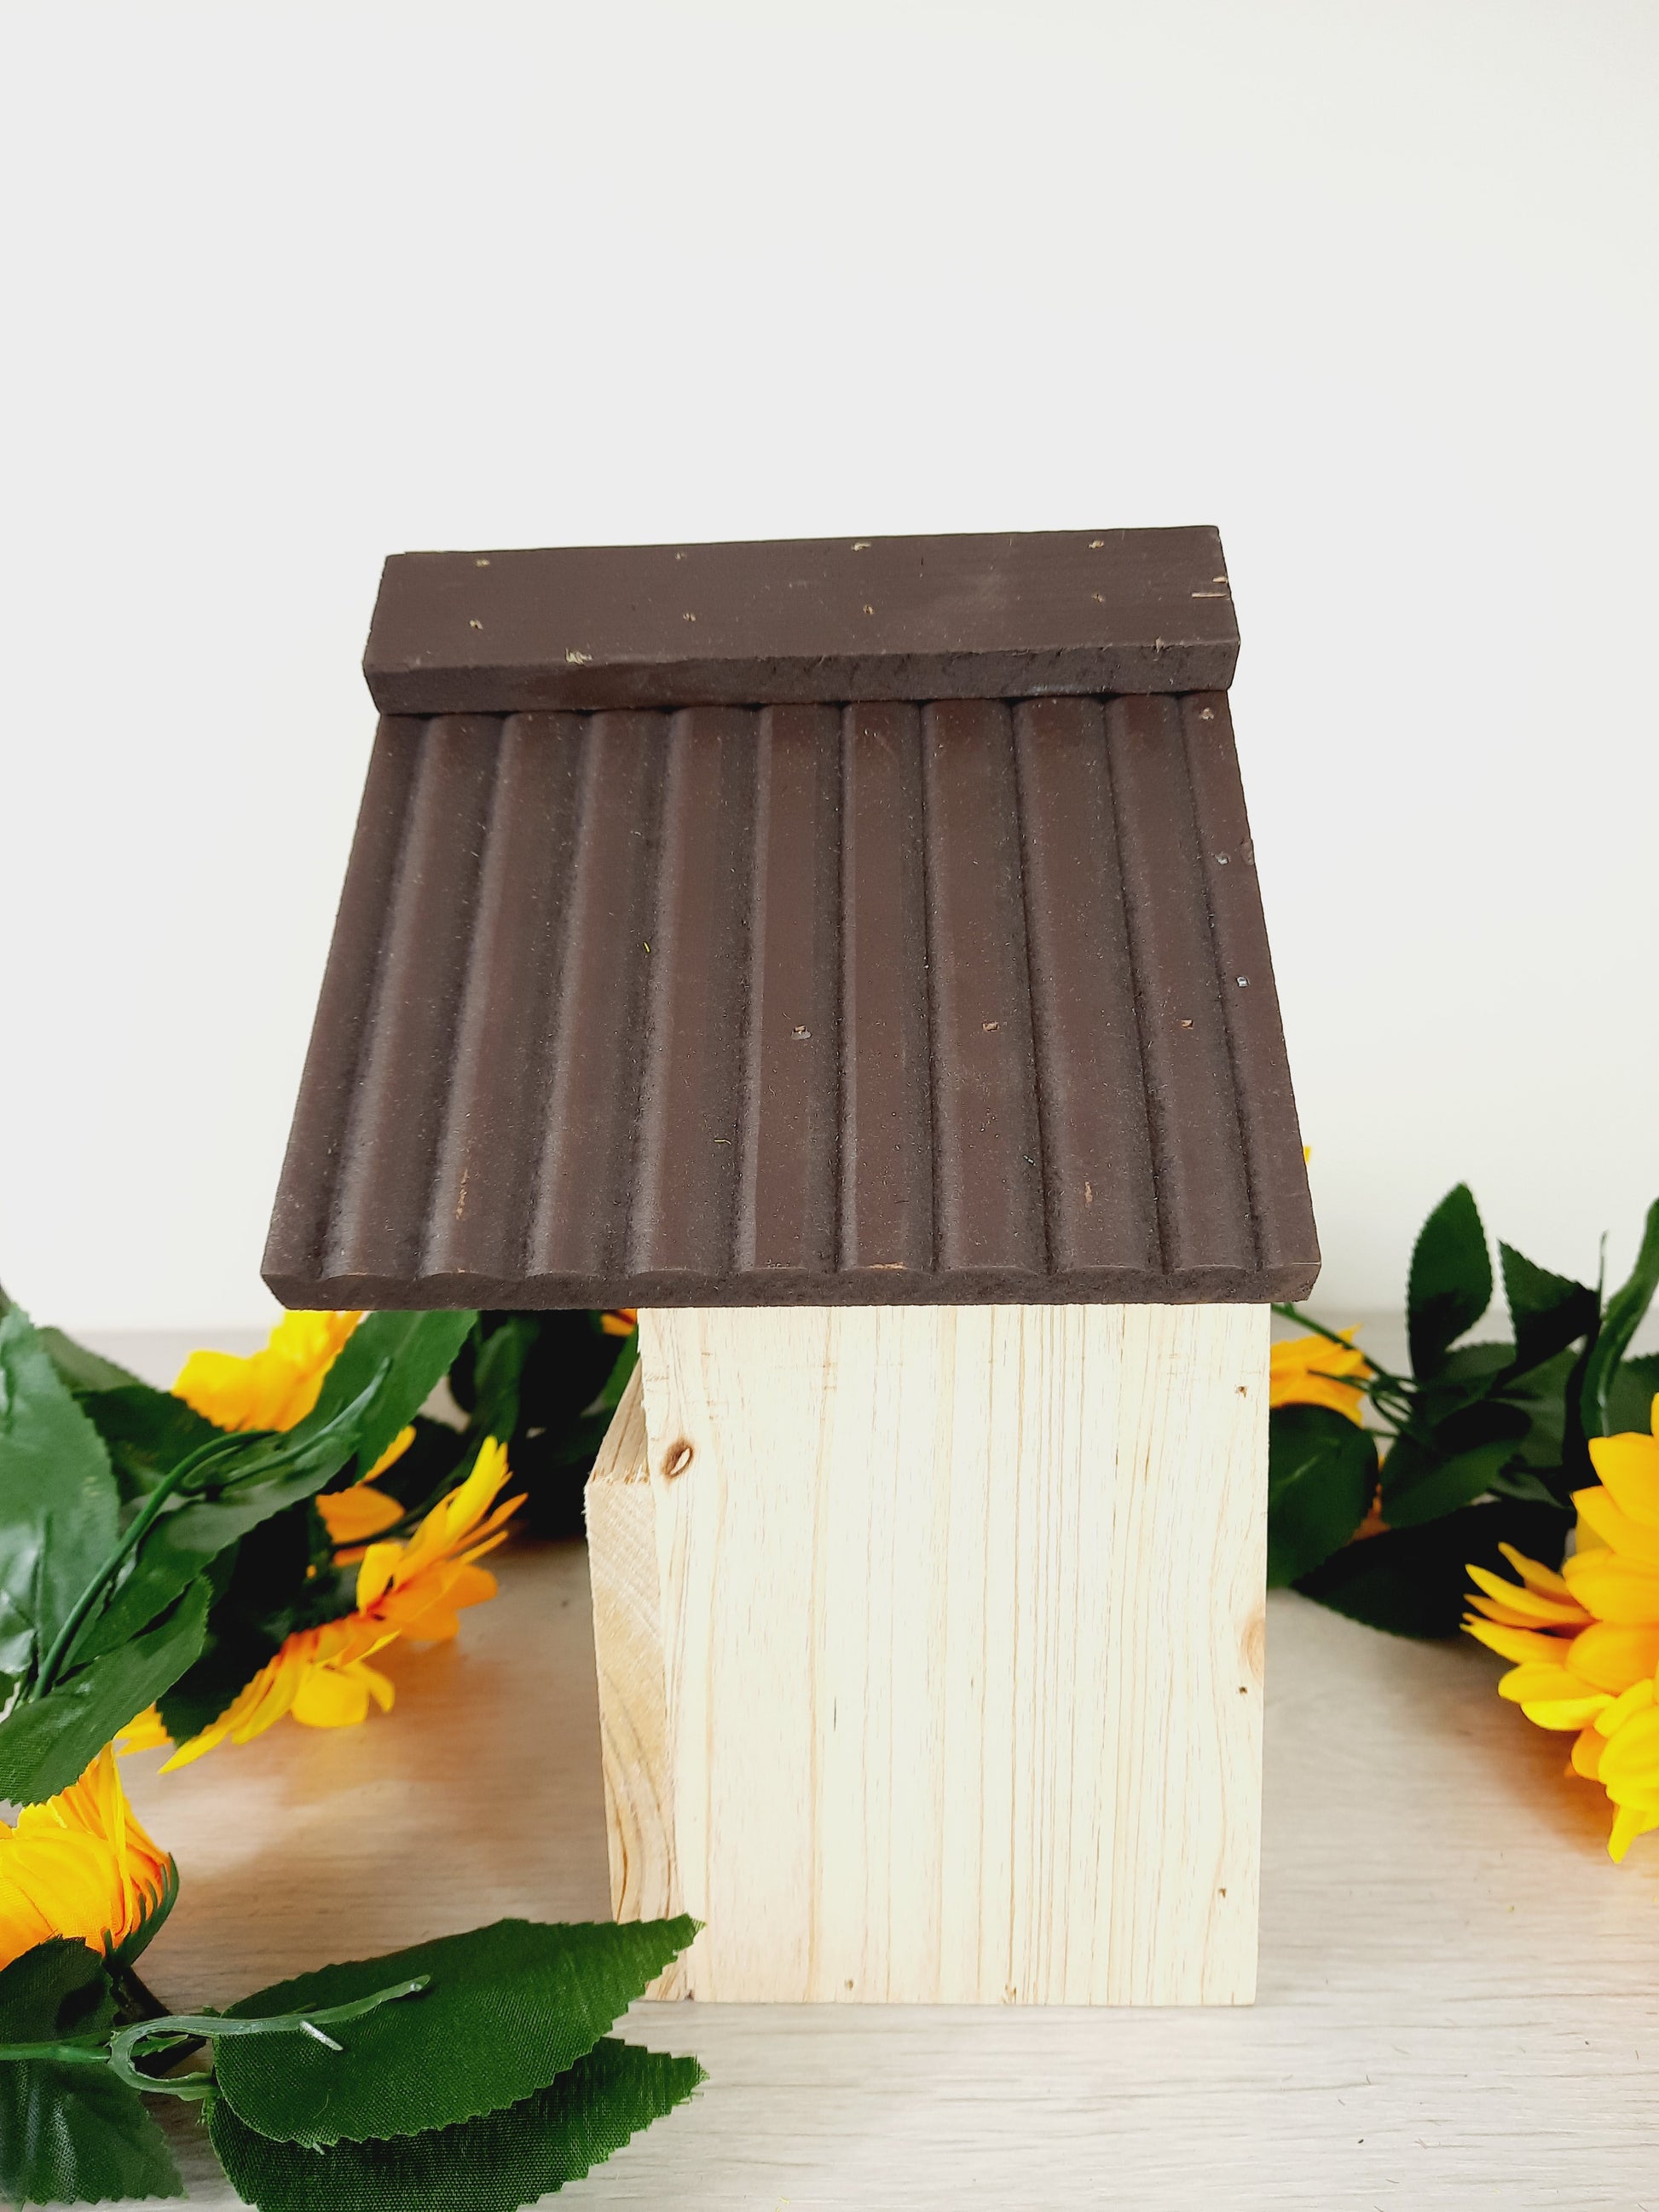 Side profile of the bird nesting box with faux sunflowers as props.